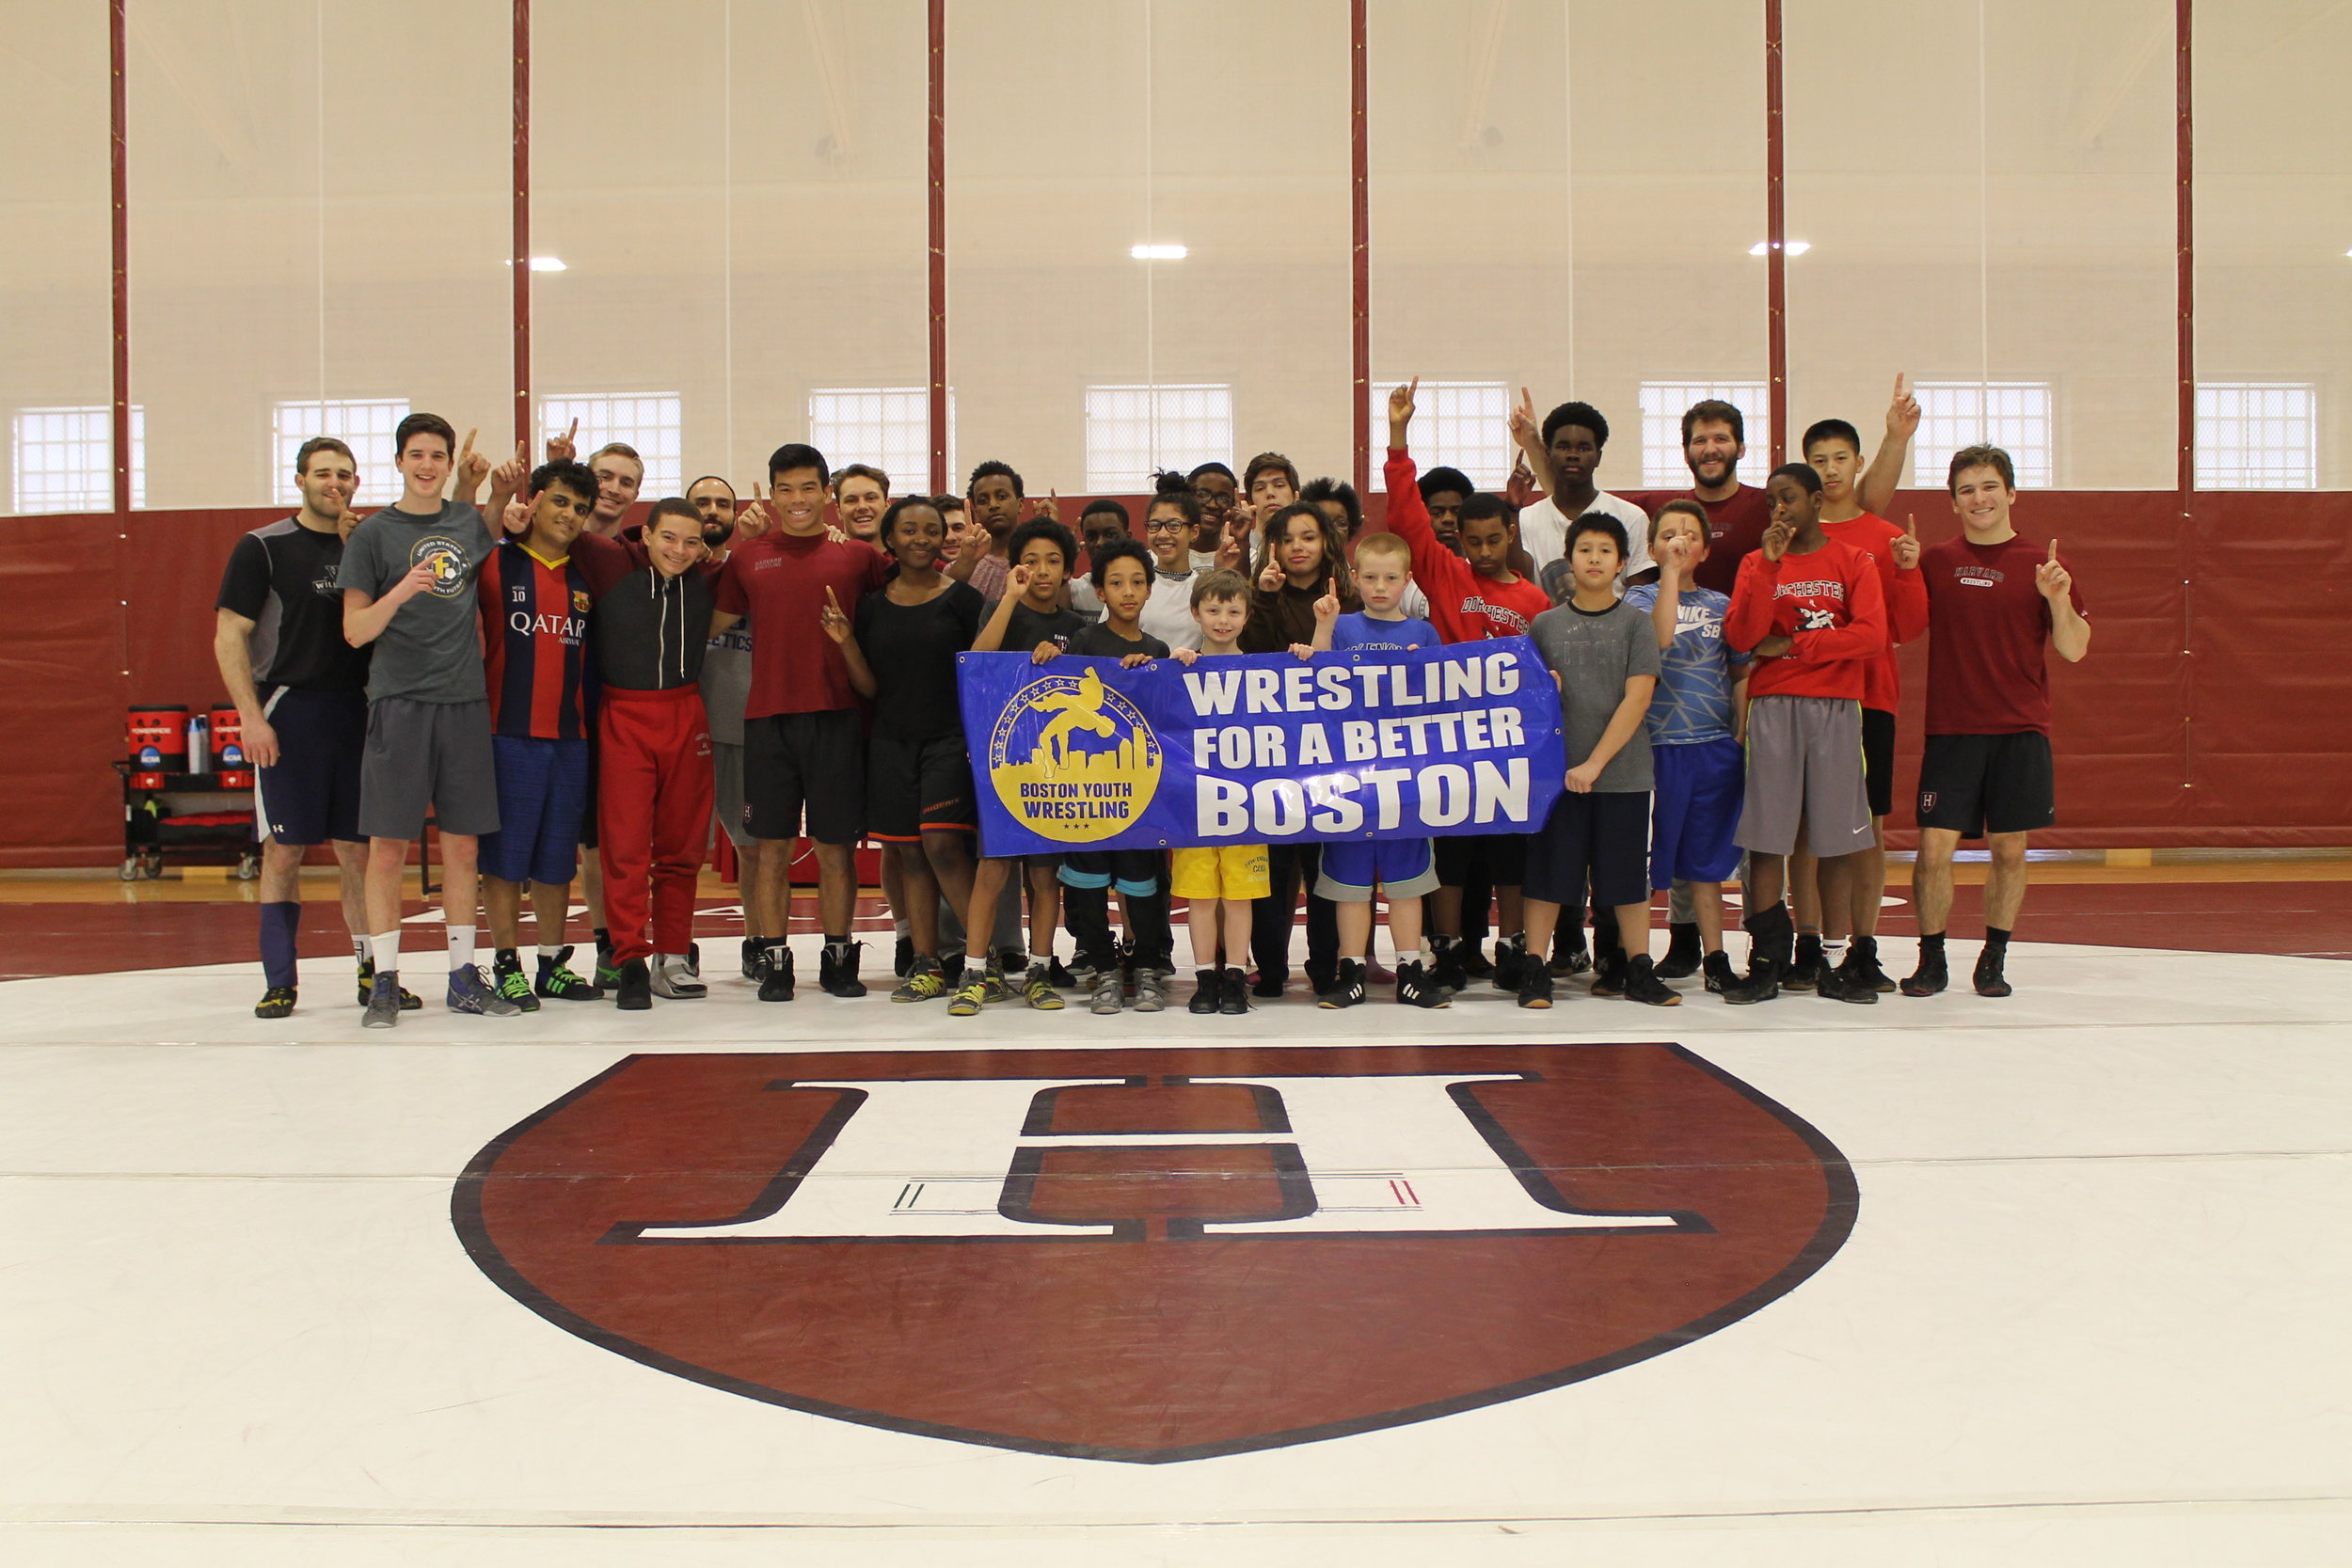 BYW student-athletes gather together alongside some of the Harvard Wrestling team's wrestlers and coaching staff for a picture at the Maklin Athletic Center in Cambridge, MA.